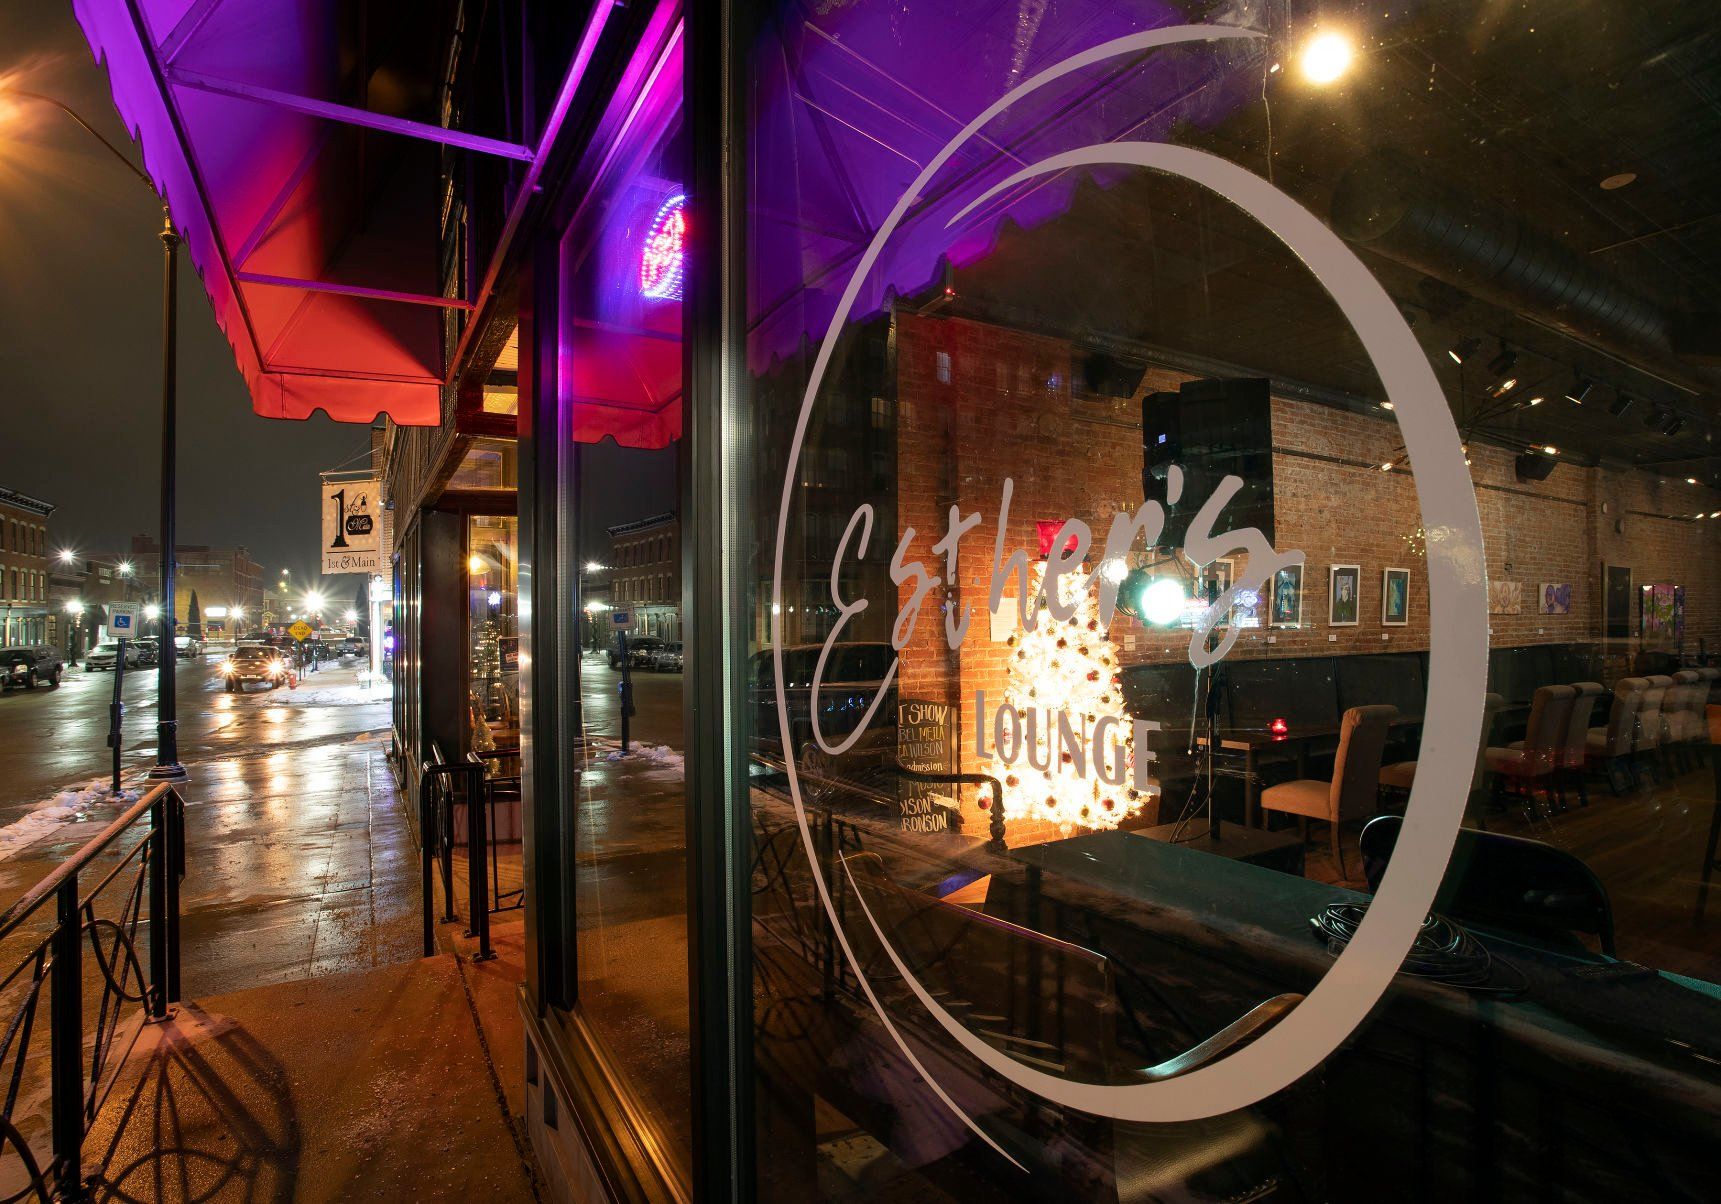 Esther’s Lounge, 123 Main St. in Dubuque, will serve as a hub for Dubuque Area Arts Collective.    PHOTO CREDIT: Stephen Gassman